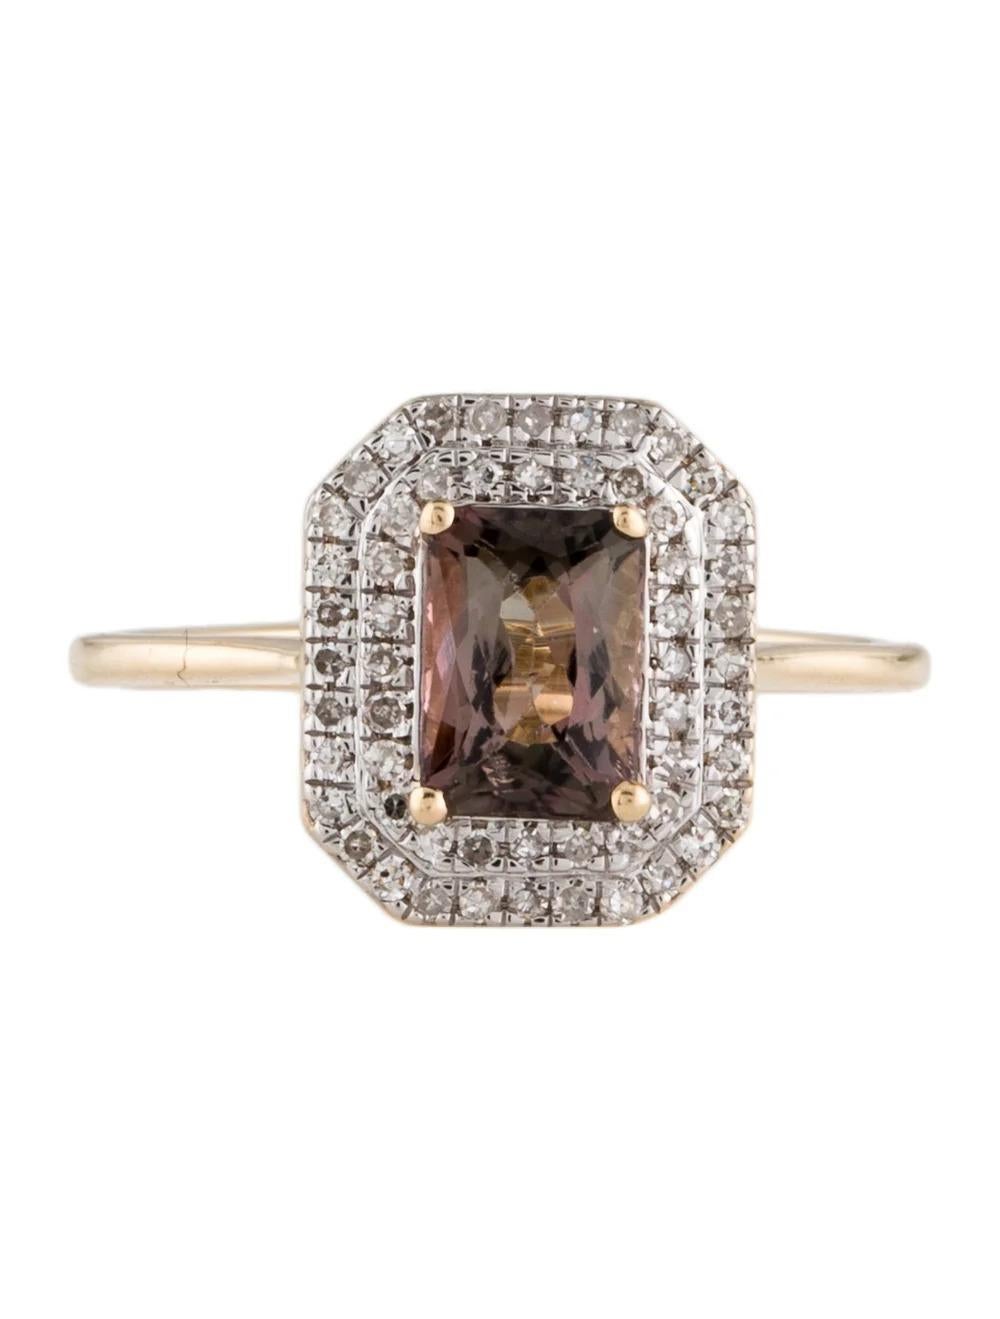 Emerald Cut 14K 1.07ctw Tourmaline Diamond Cocktail Ring - Vintage Style Jewelry - Size 6.25 For Sale